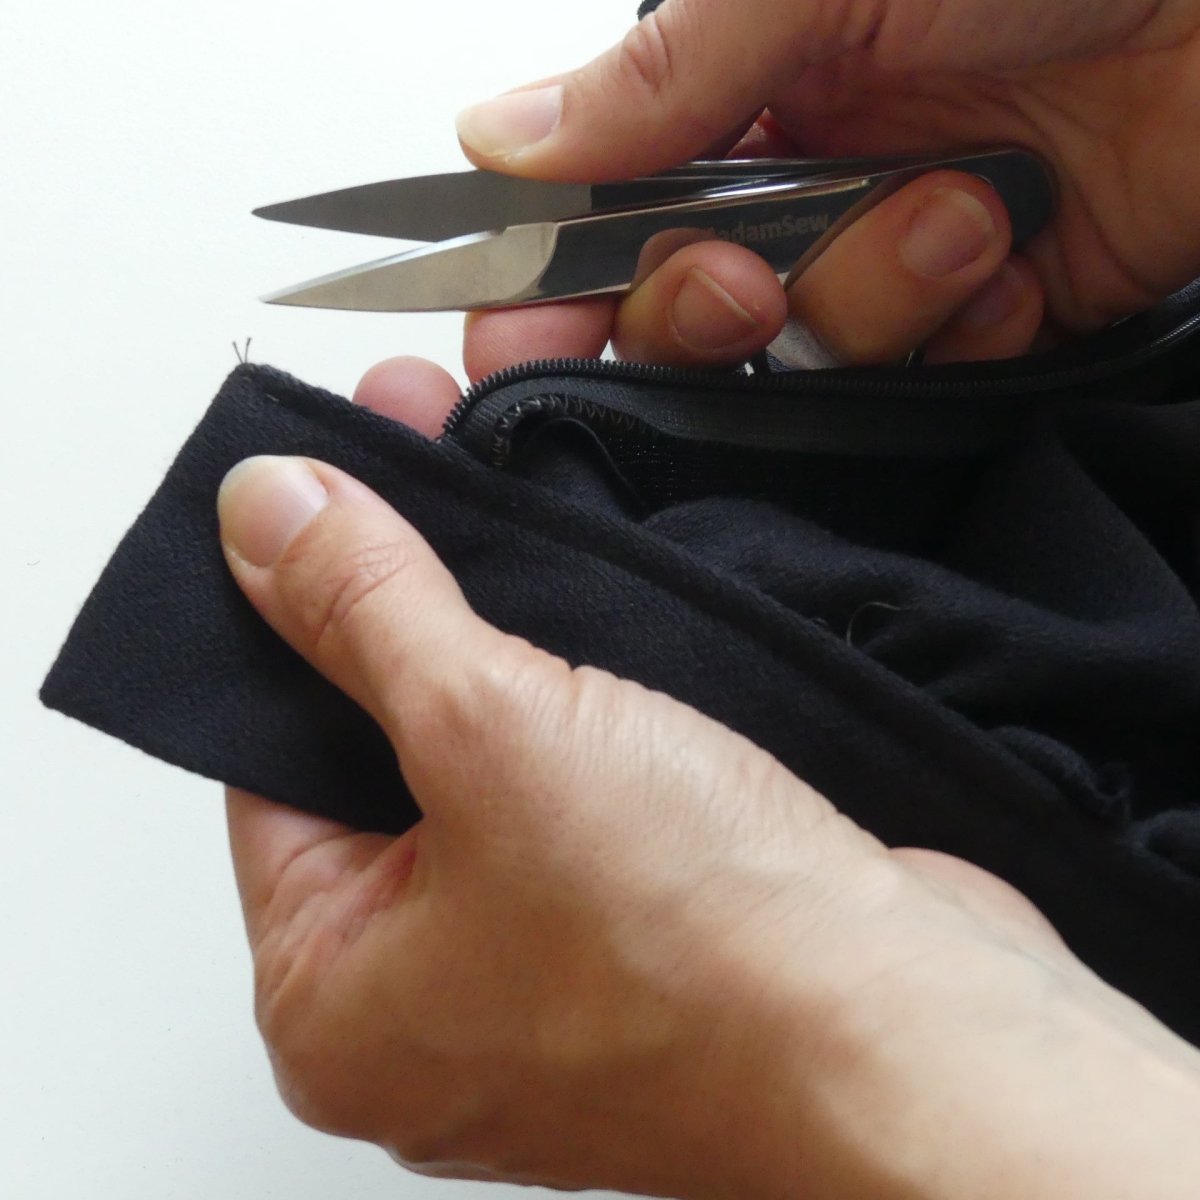 Snipping threads with Thread Snips when making clothes